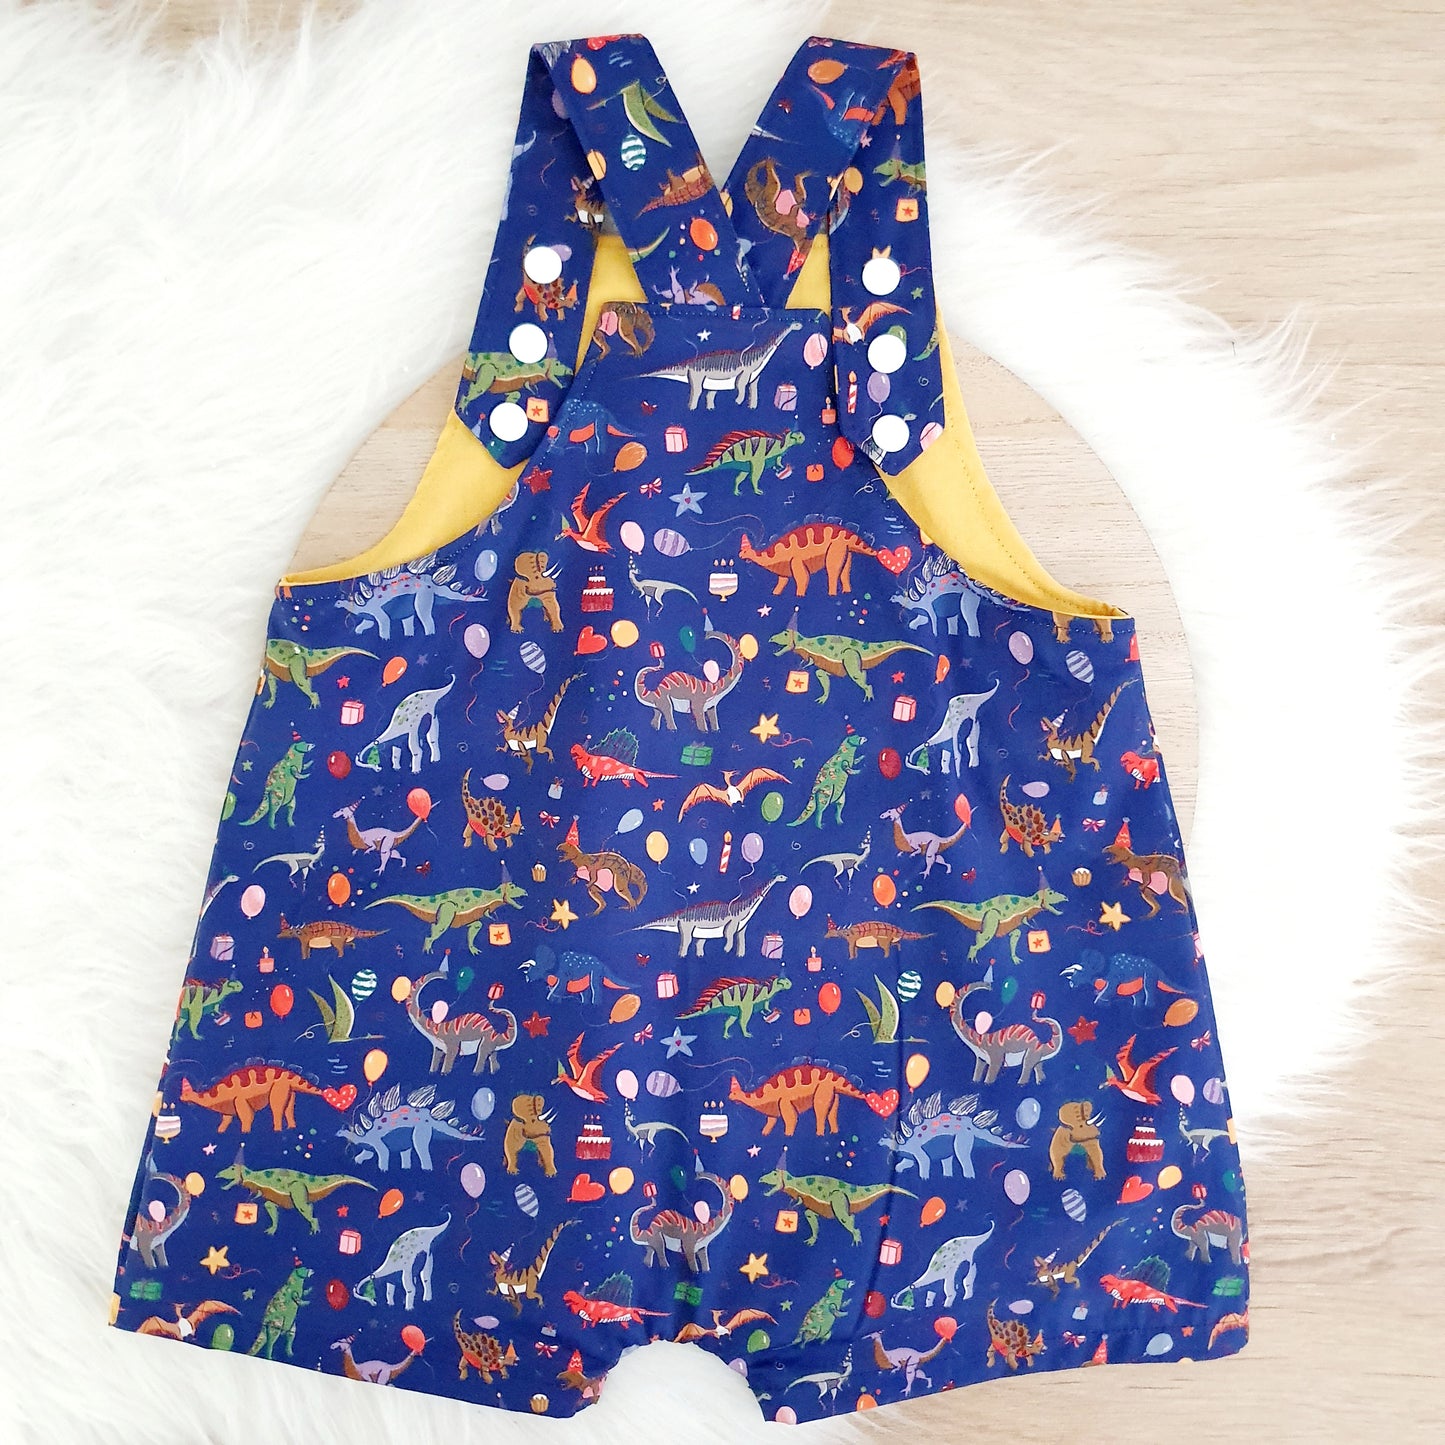 DINOSAUR BIRTHDAY PARTY Overalls, Baby / Toddler Overalls, Short Leg Romper / Birthday / Cake Smash Outfit, Size 2